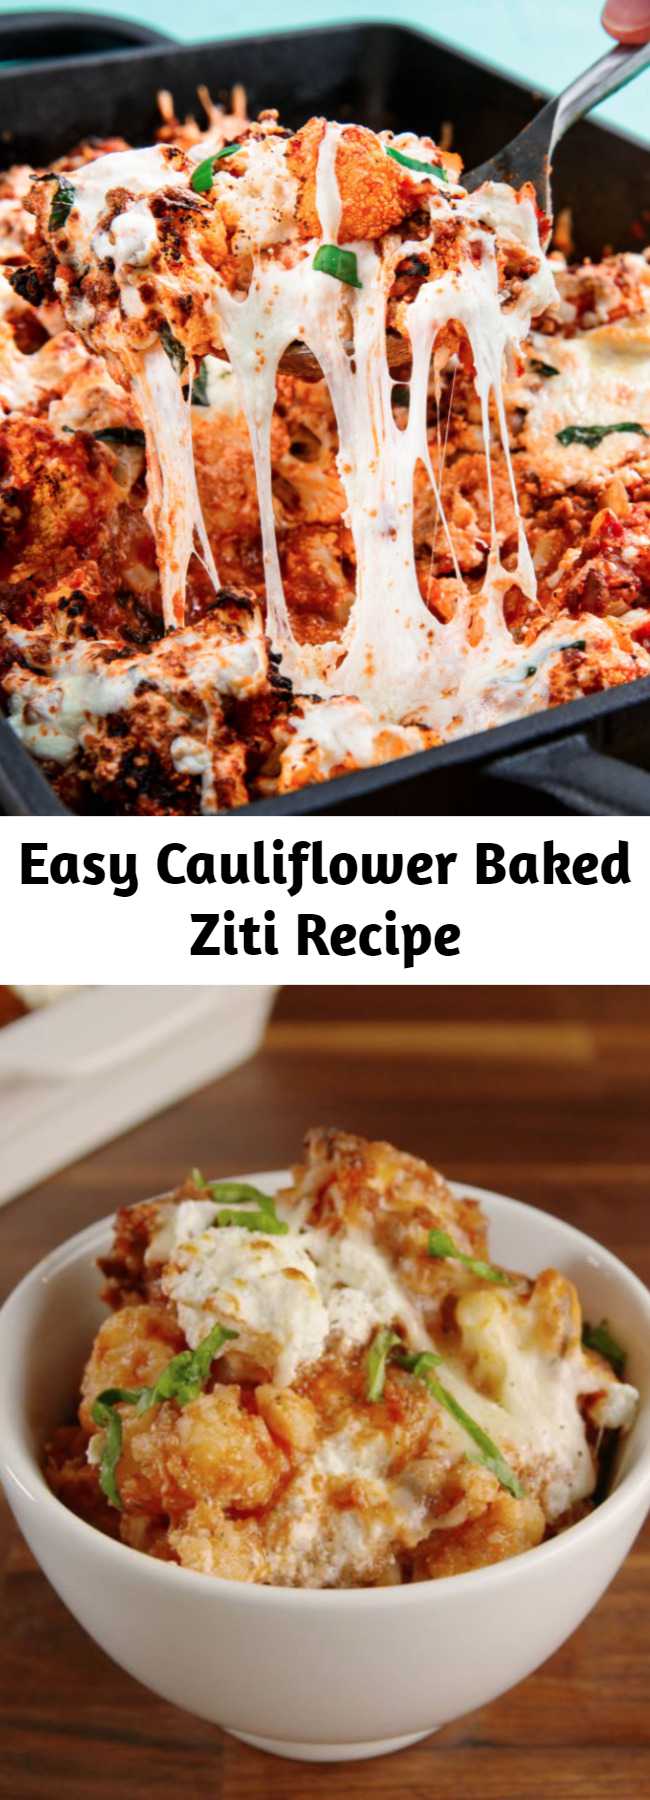 Easy Cauliflower Baked Ziti Recipe - There's not actually any ziti in this recipe. But you honestly won't even notice. The blanched cauliflower does a fine job of replacing the pasta. Just make sure to drain it well before tossing it with the sauce. #easy #recipe #cauliflower #healthy #lowcarb #baked #ziti #ricotta #cheese #diet #filling #hearty